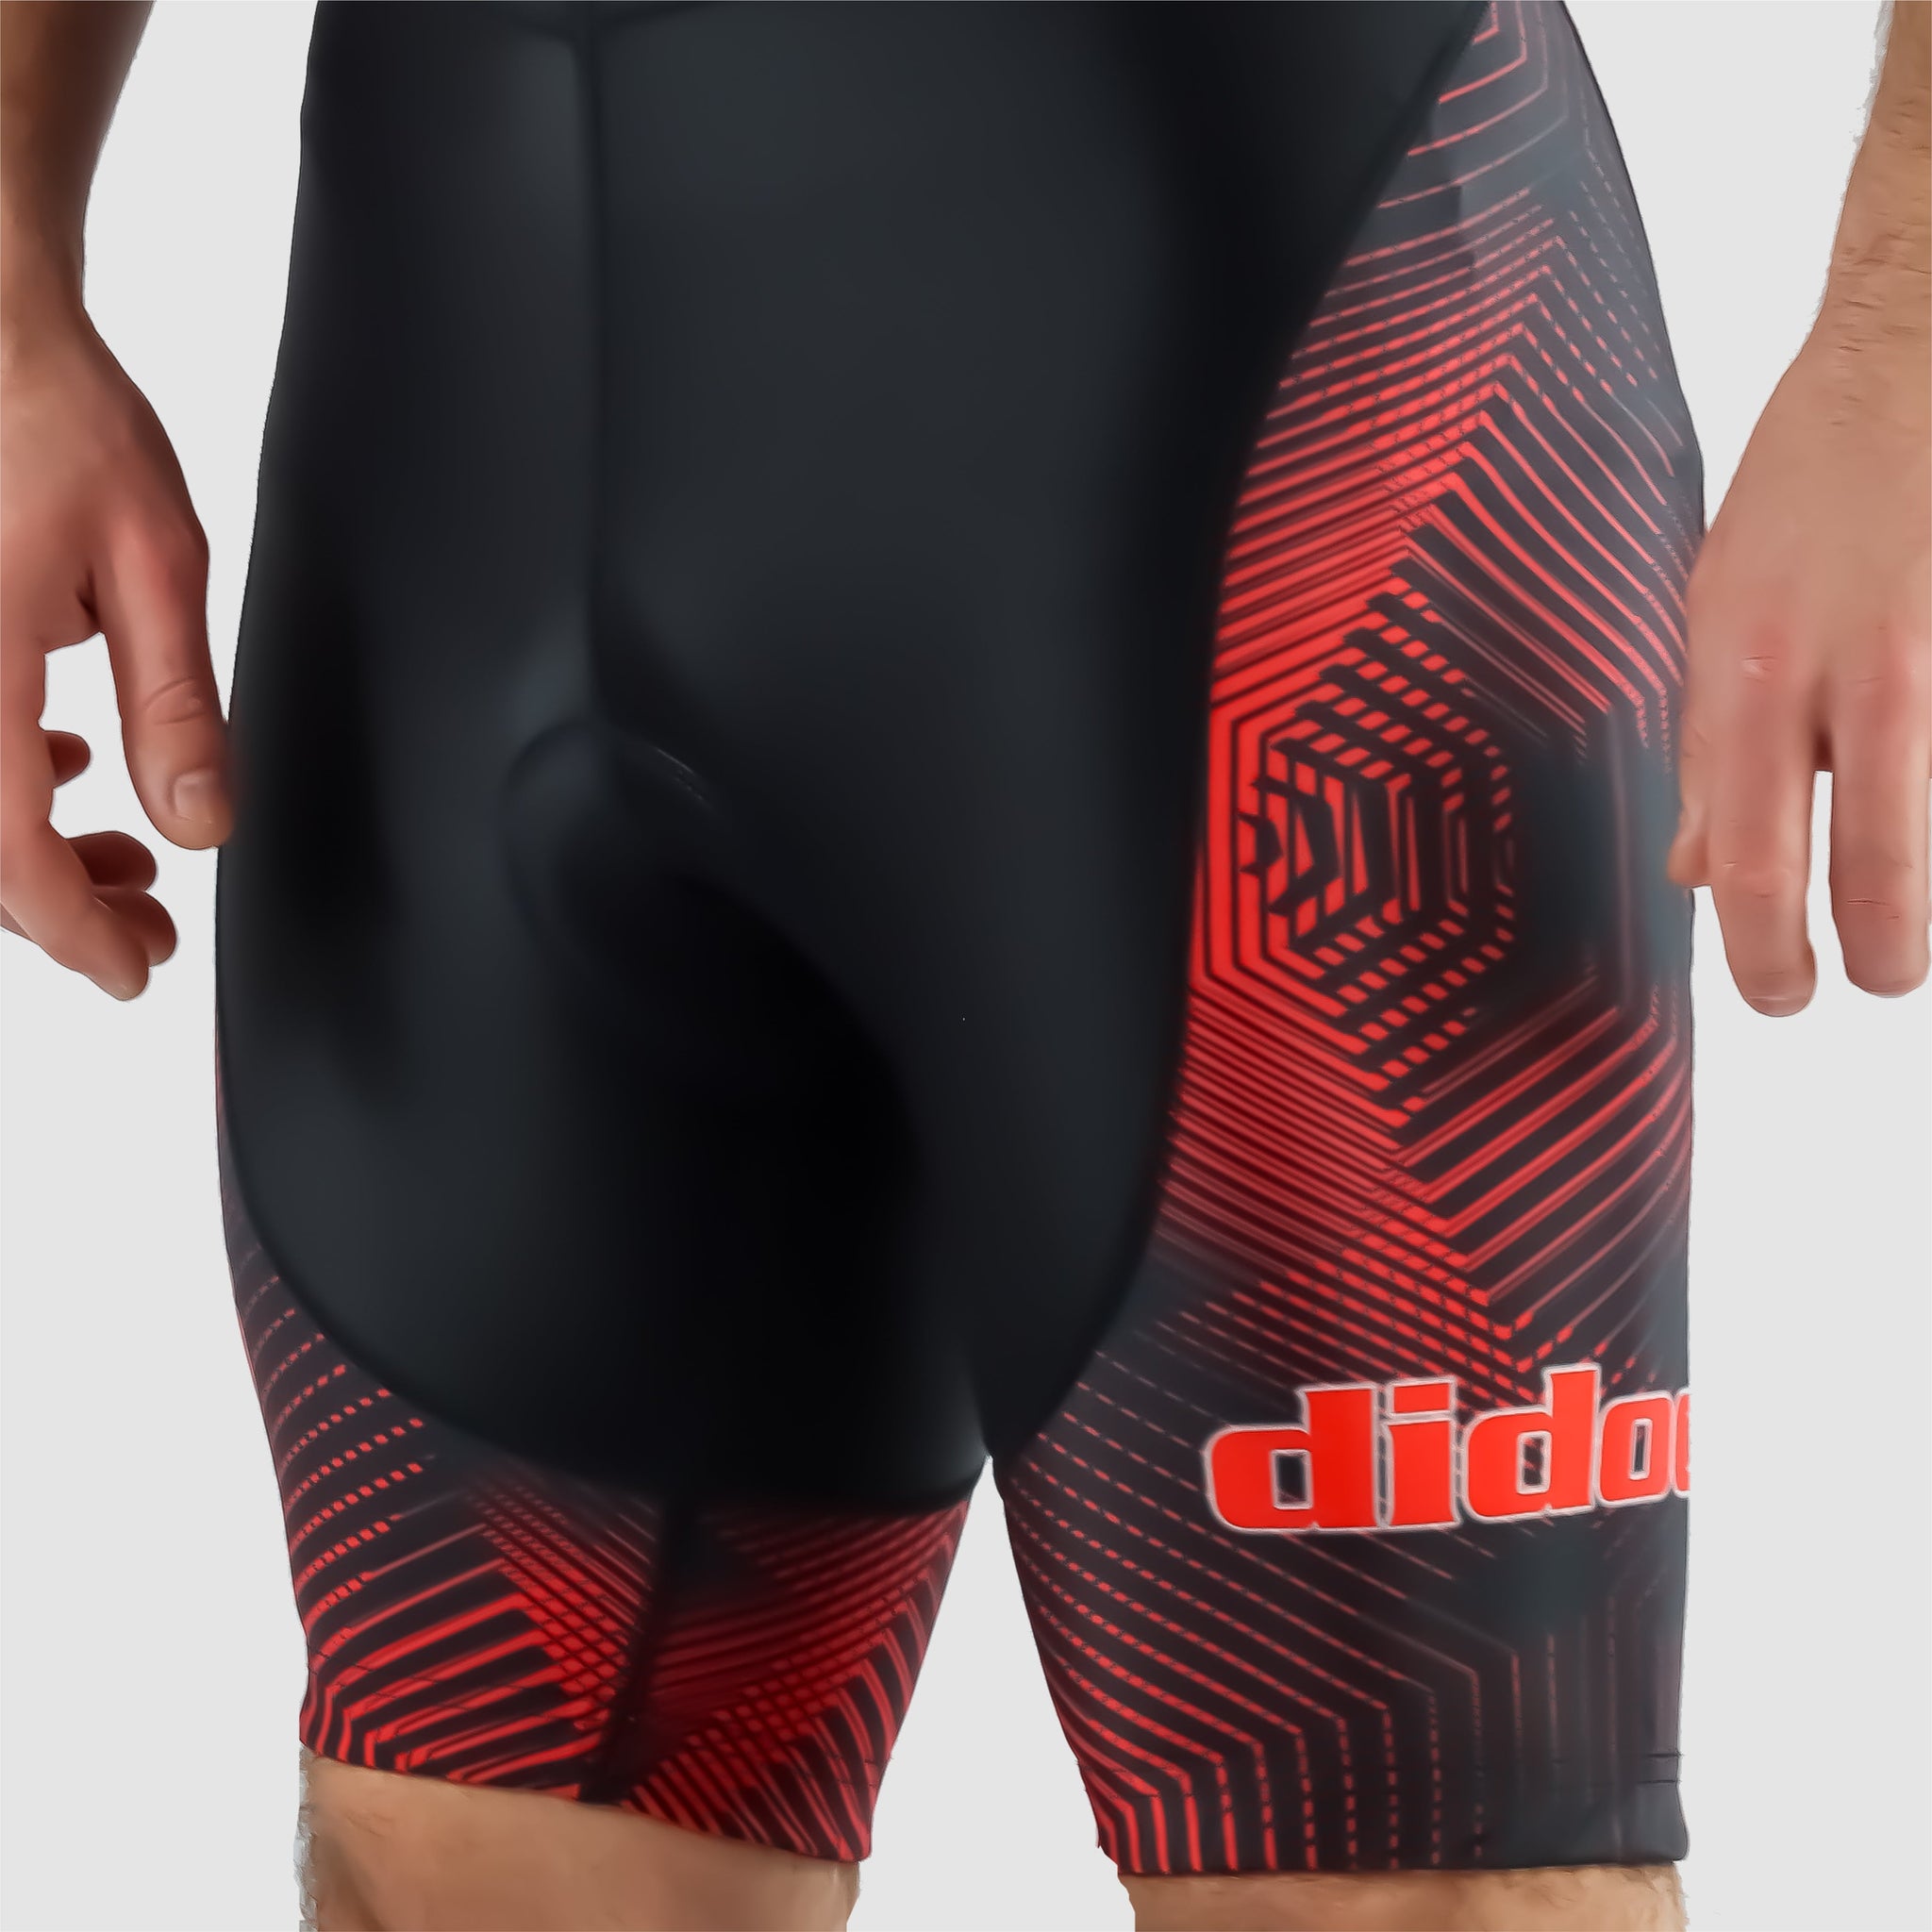 DiDOO Men's Classic Quick Dry Padded Cycling Bib Shorts Black and Red